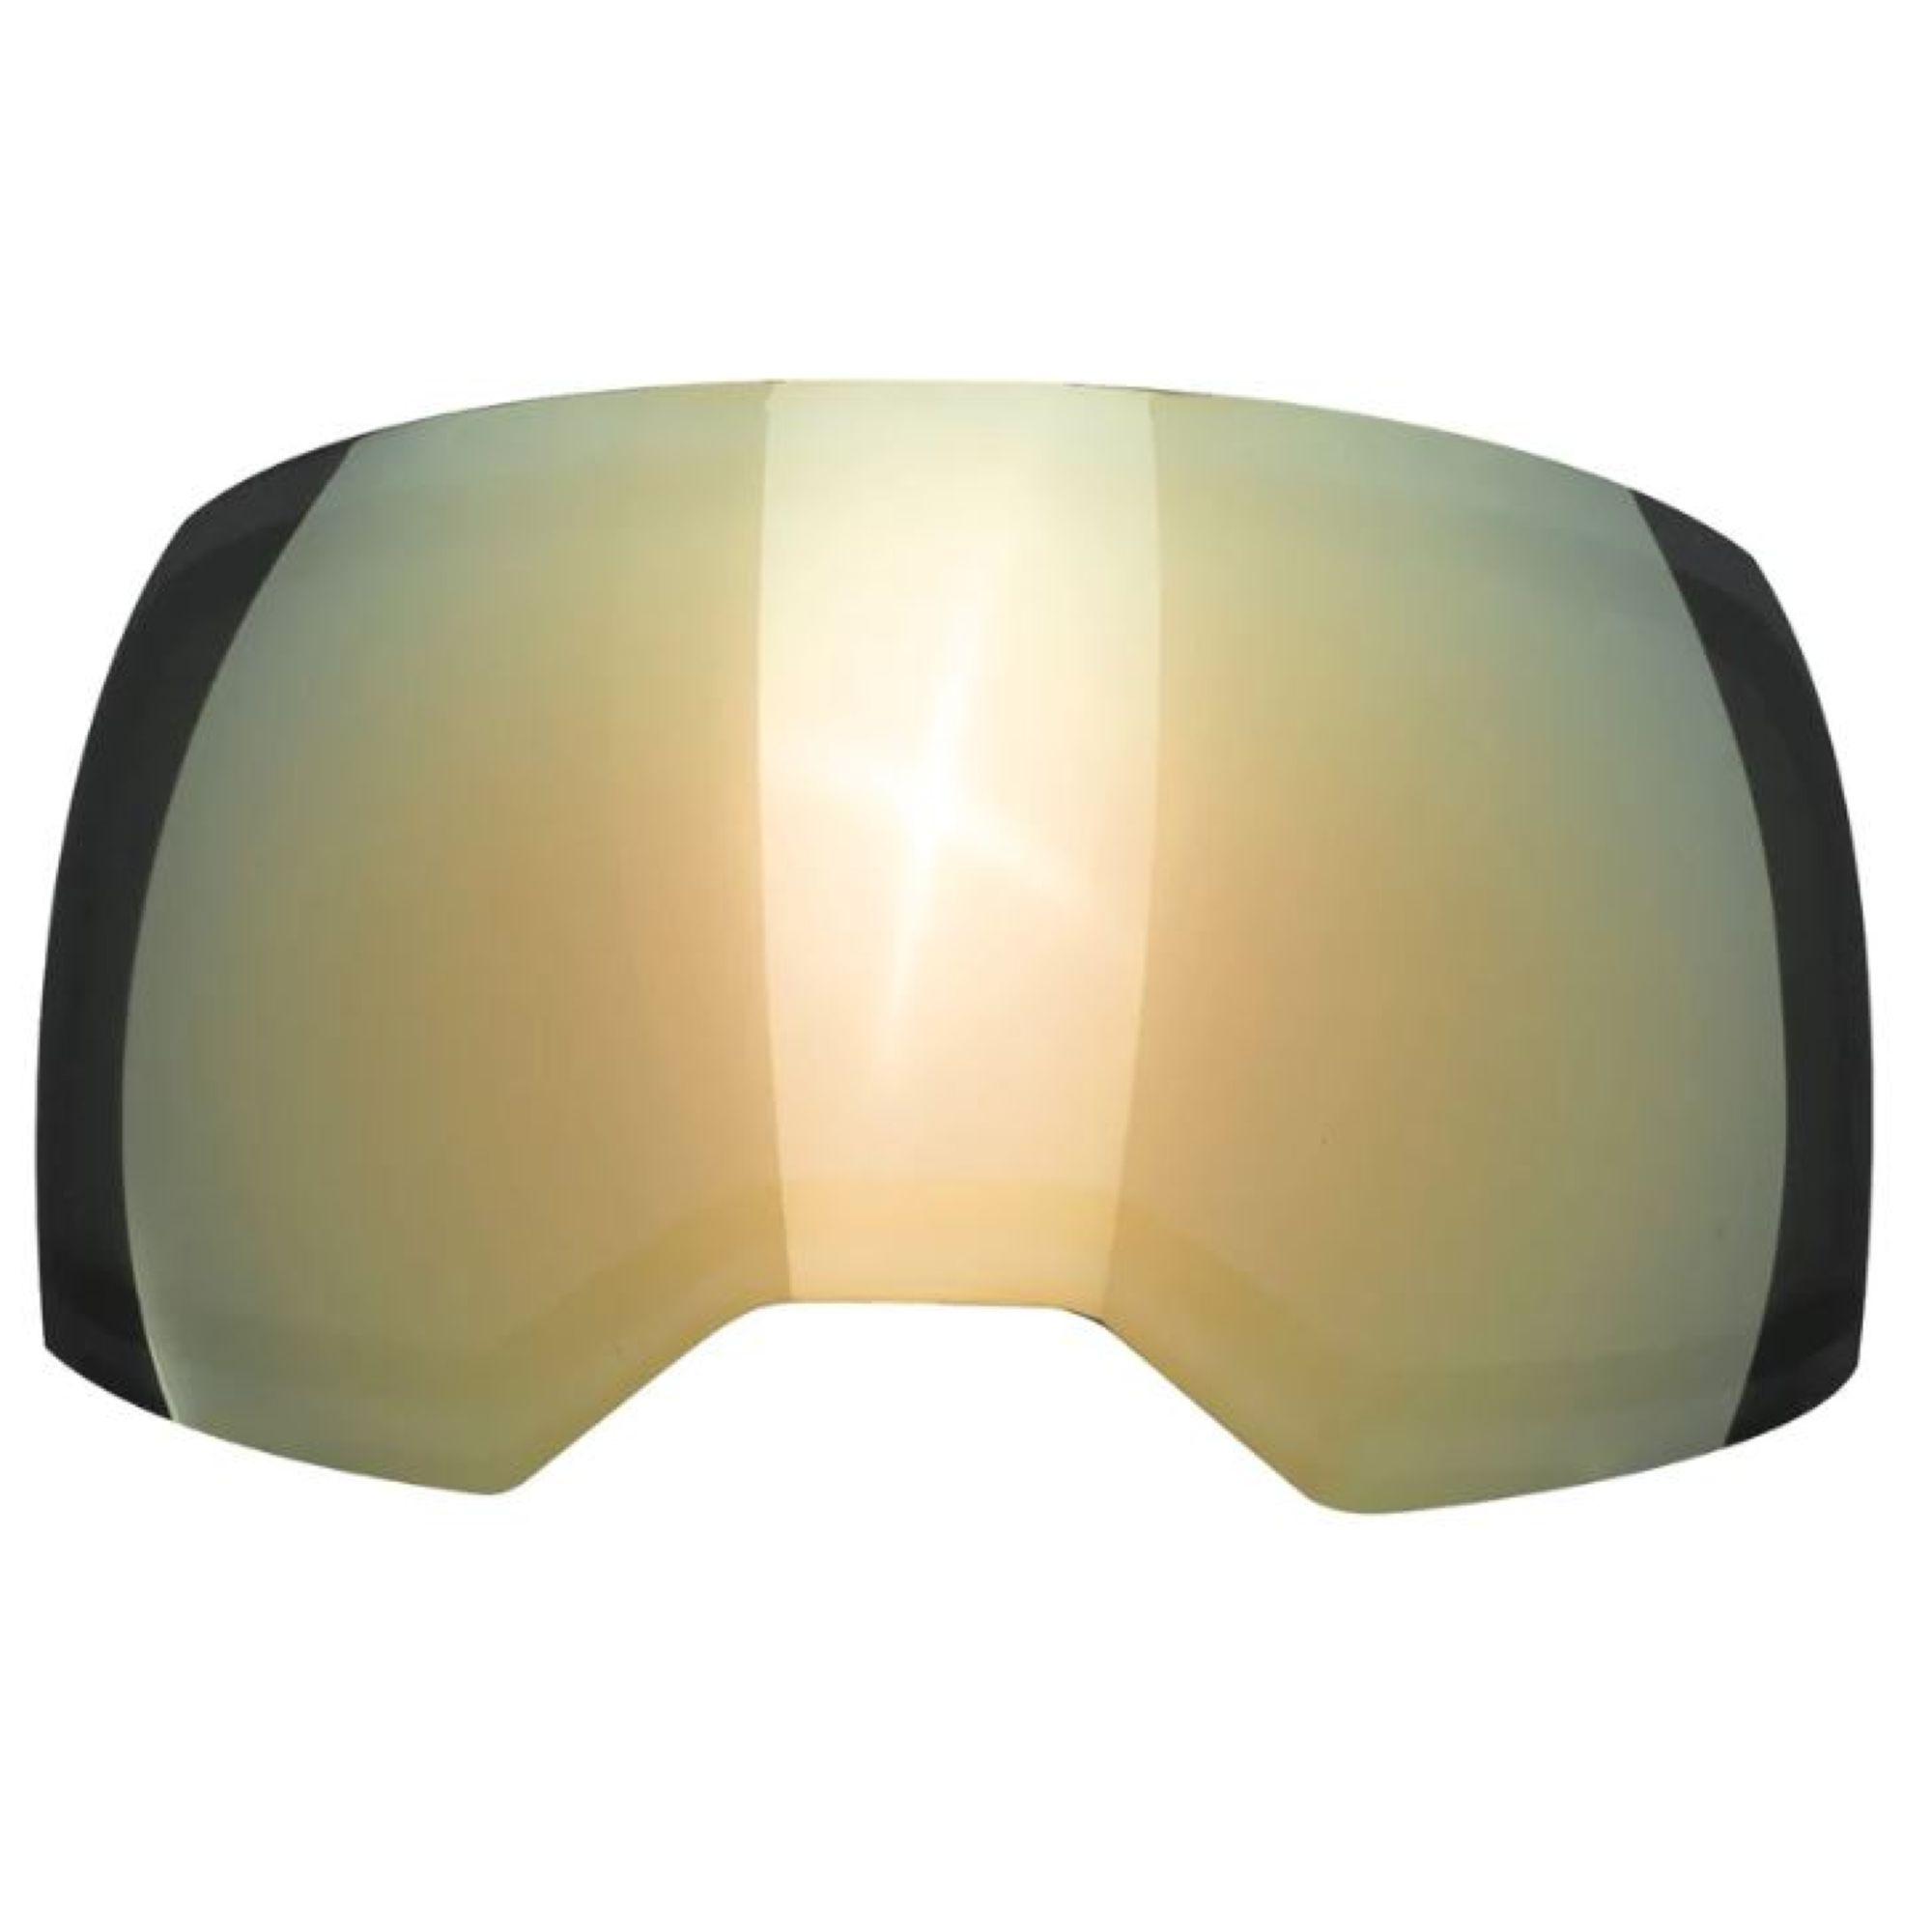 Empire EVS Replacement Thermal Gold Lens